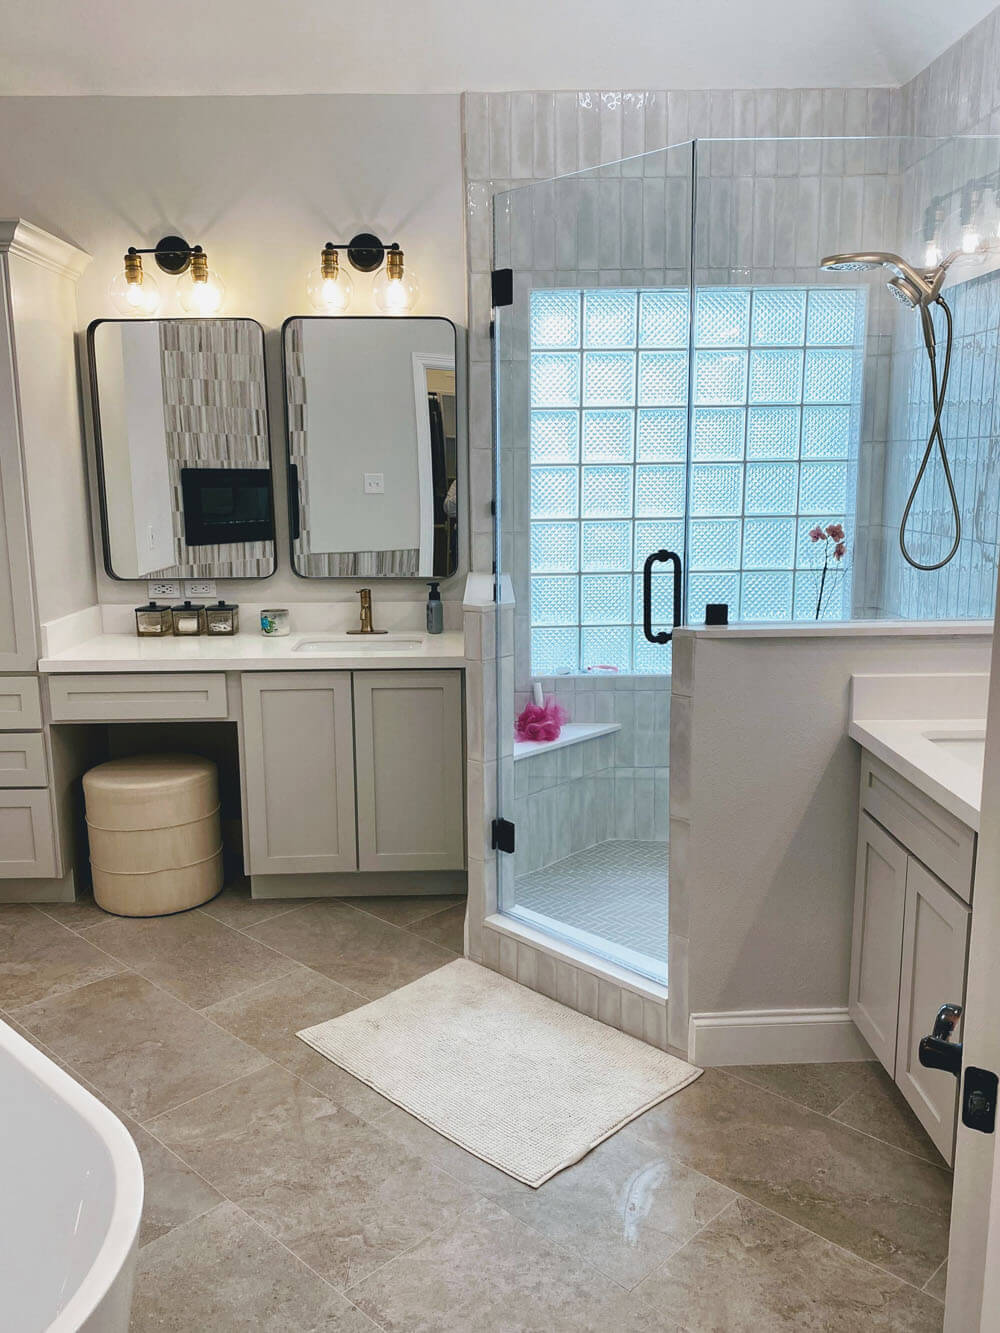 Reliable General Contractor For Residential Master Bathroom Renovations | Mr. Drywall Repairs and Remodeling